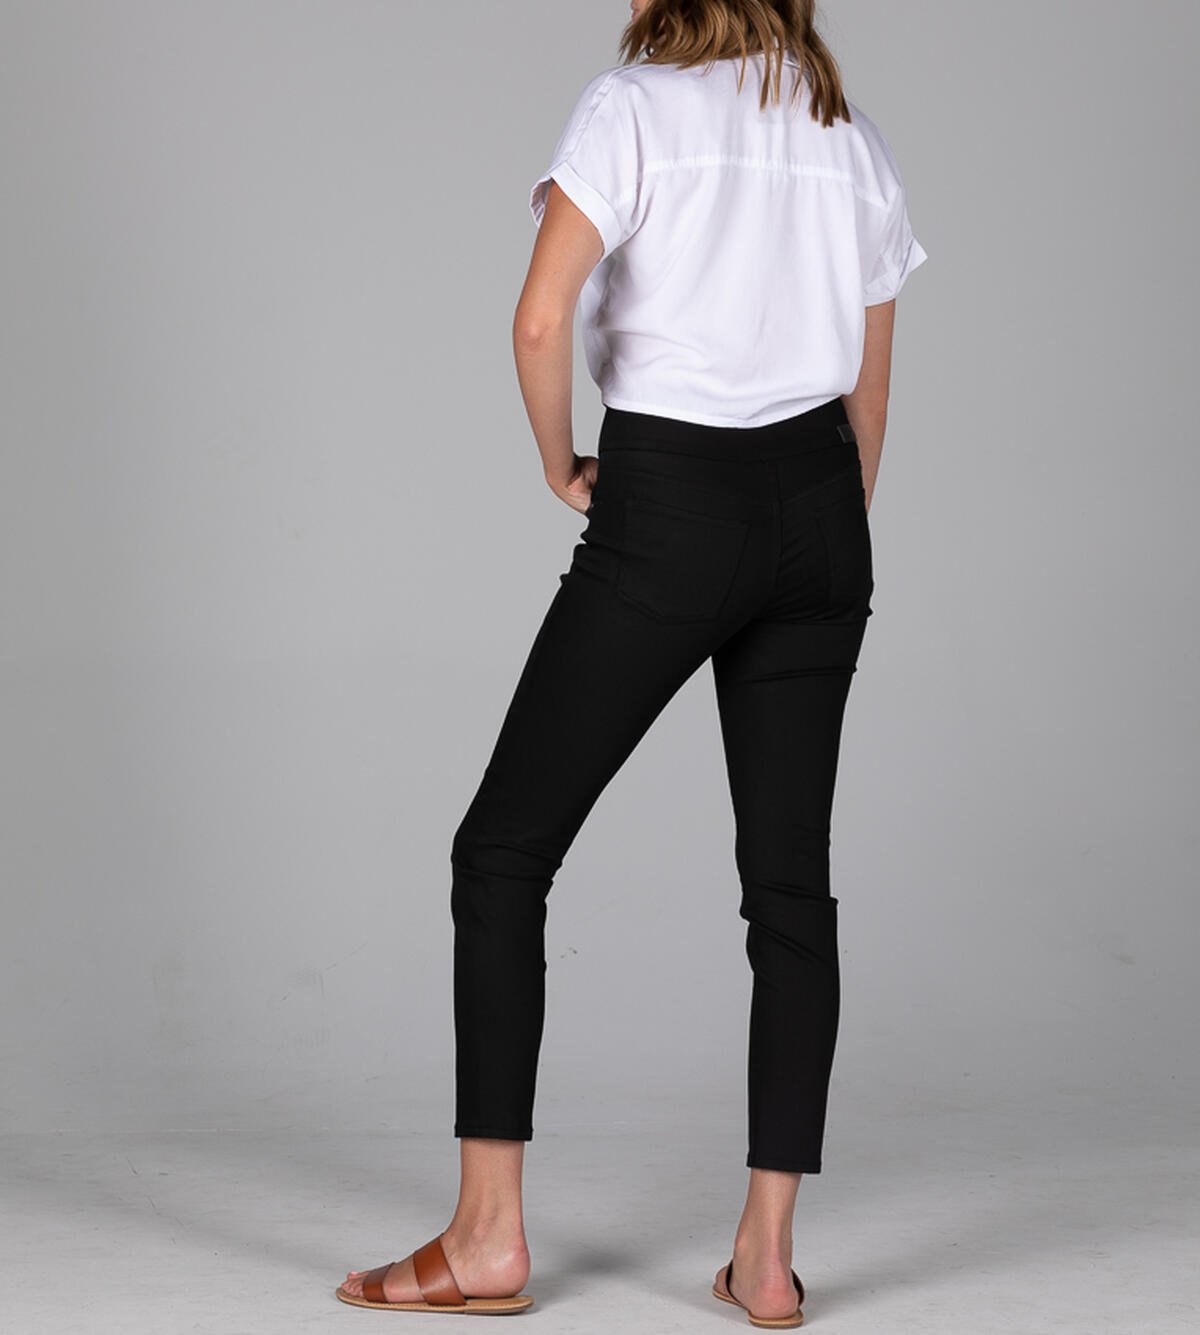 Nora Mid Rise Skinny Pull-On Jeans Petite, , hi-res image number 1